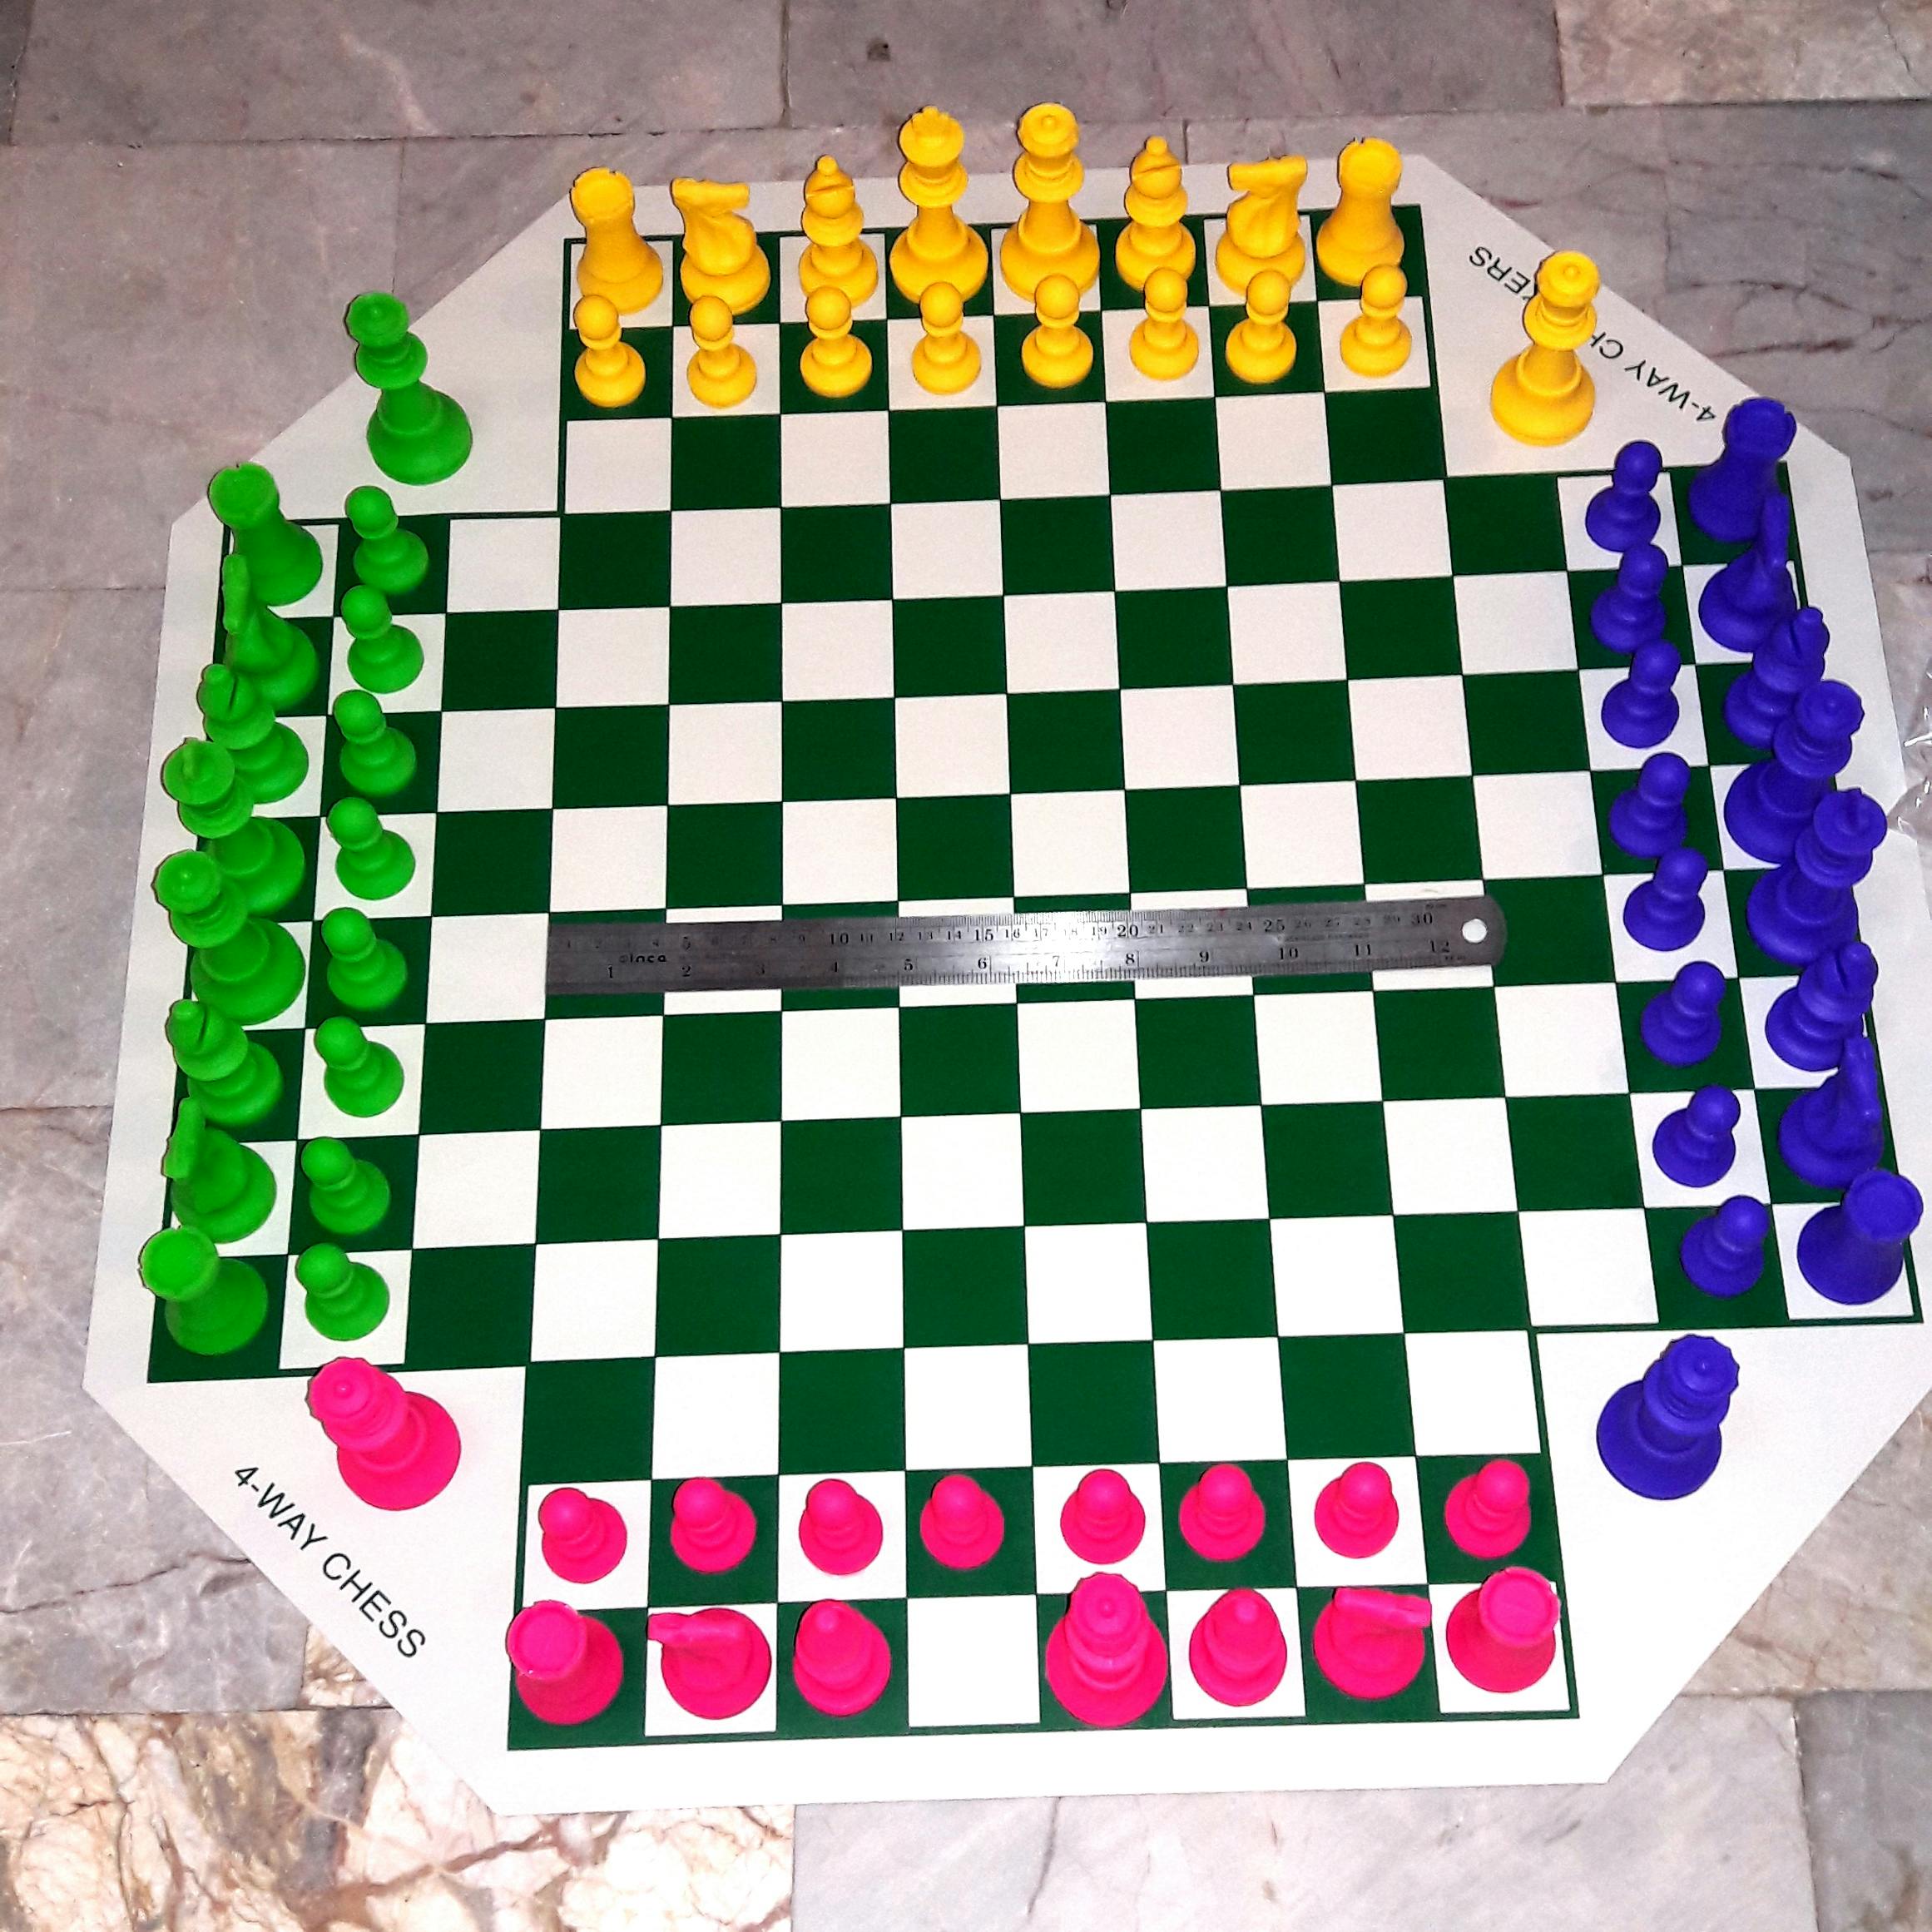 4 Player Chess, Board Game